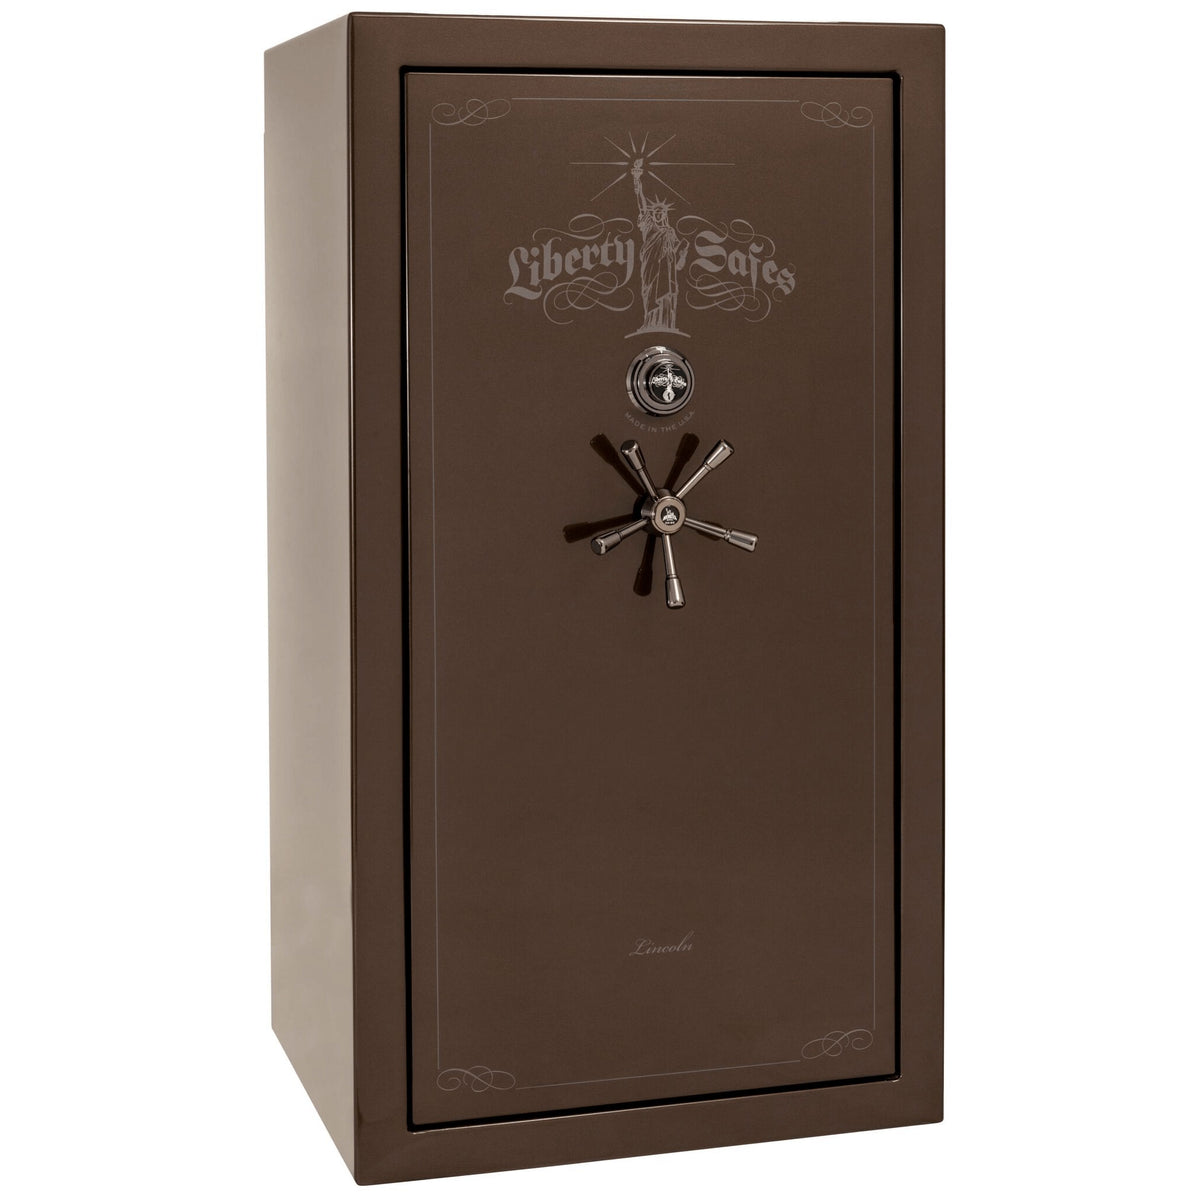 Liberty Lincoln 40 Safe in Bronze Gloss with Black Chrome Mechanical Lock.